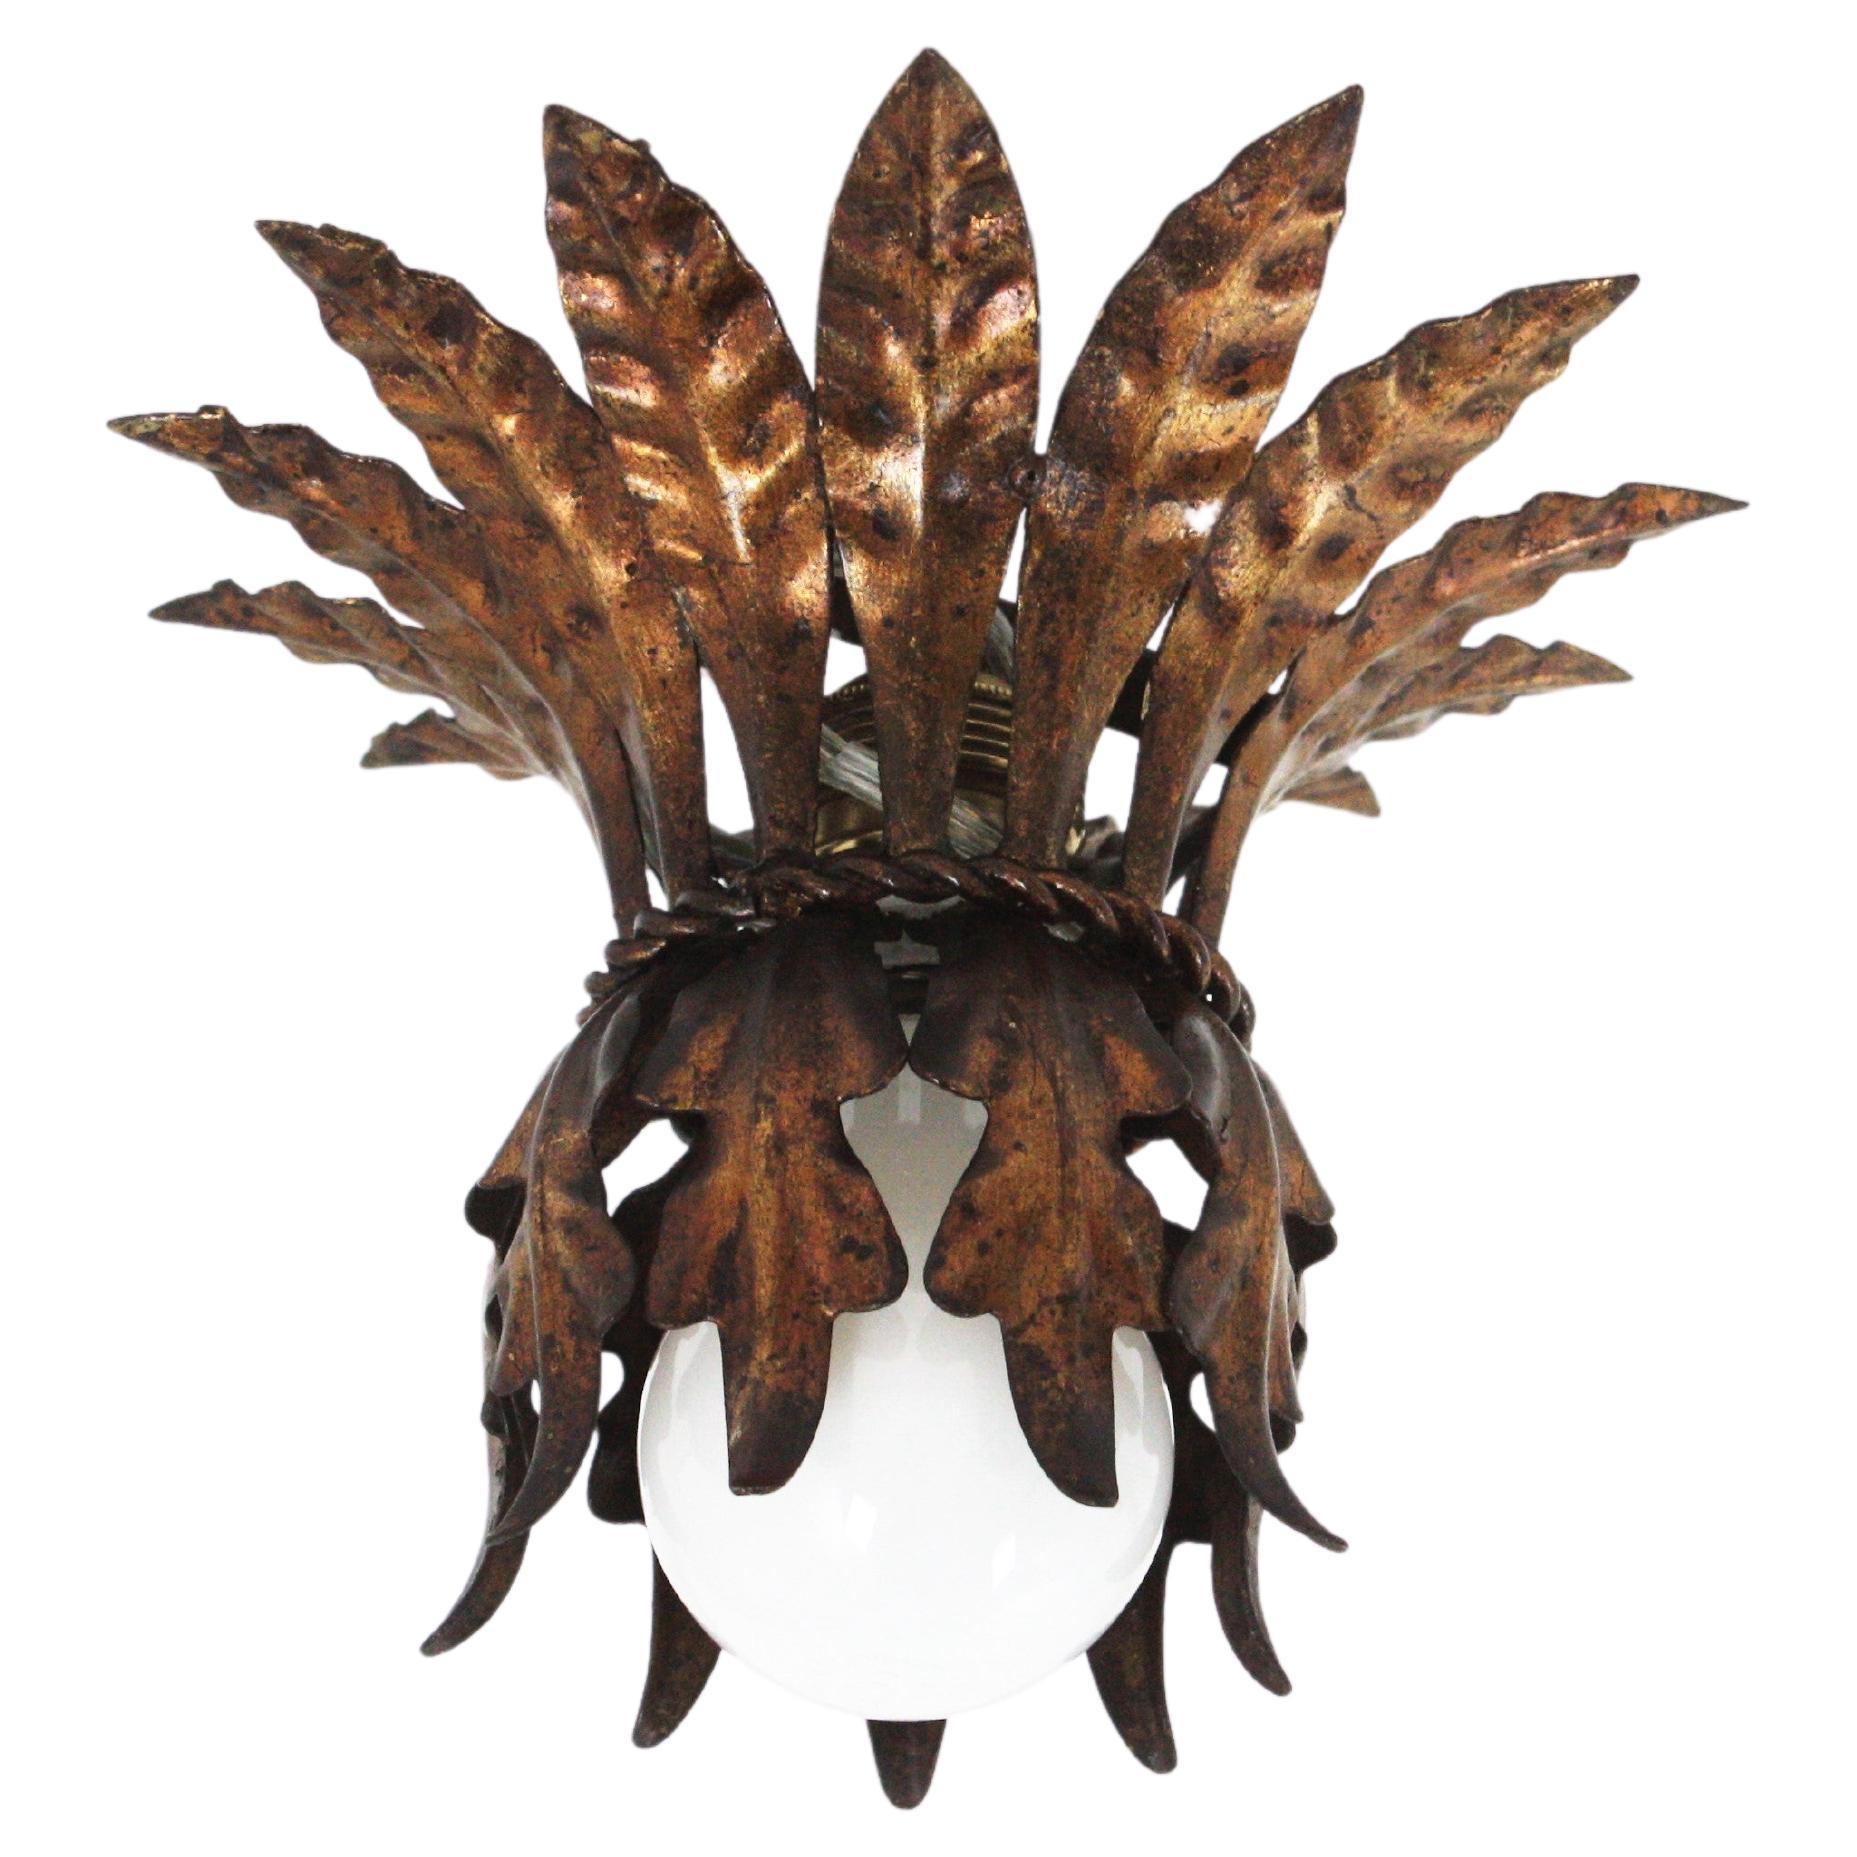 Hollywood Regency gilt iron leaves bouquet crown flush mount / pendant. France, 1940s.
This flush mount features a bouquet of iron leaves distributed as a crown sunburst and adorned with a twisted iron rope. It has one central light. The leaves